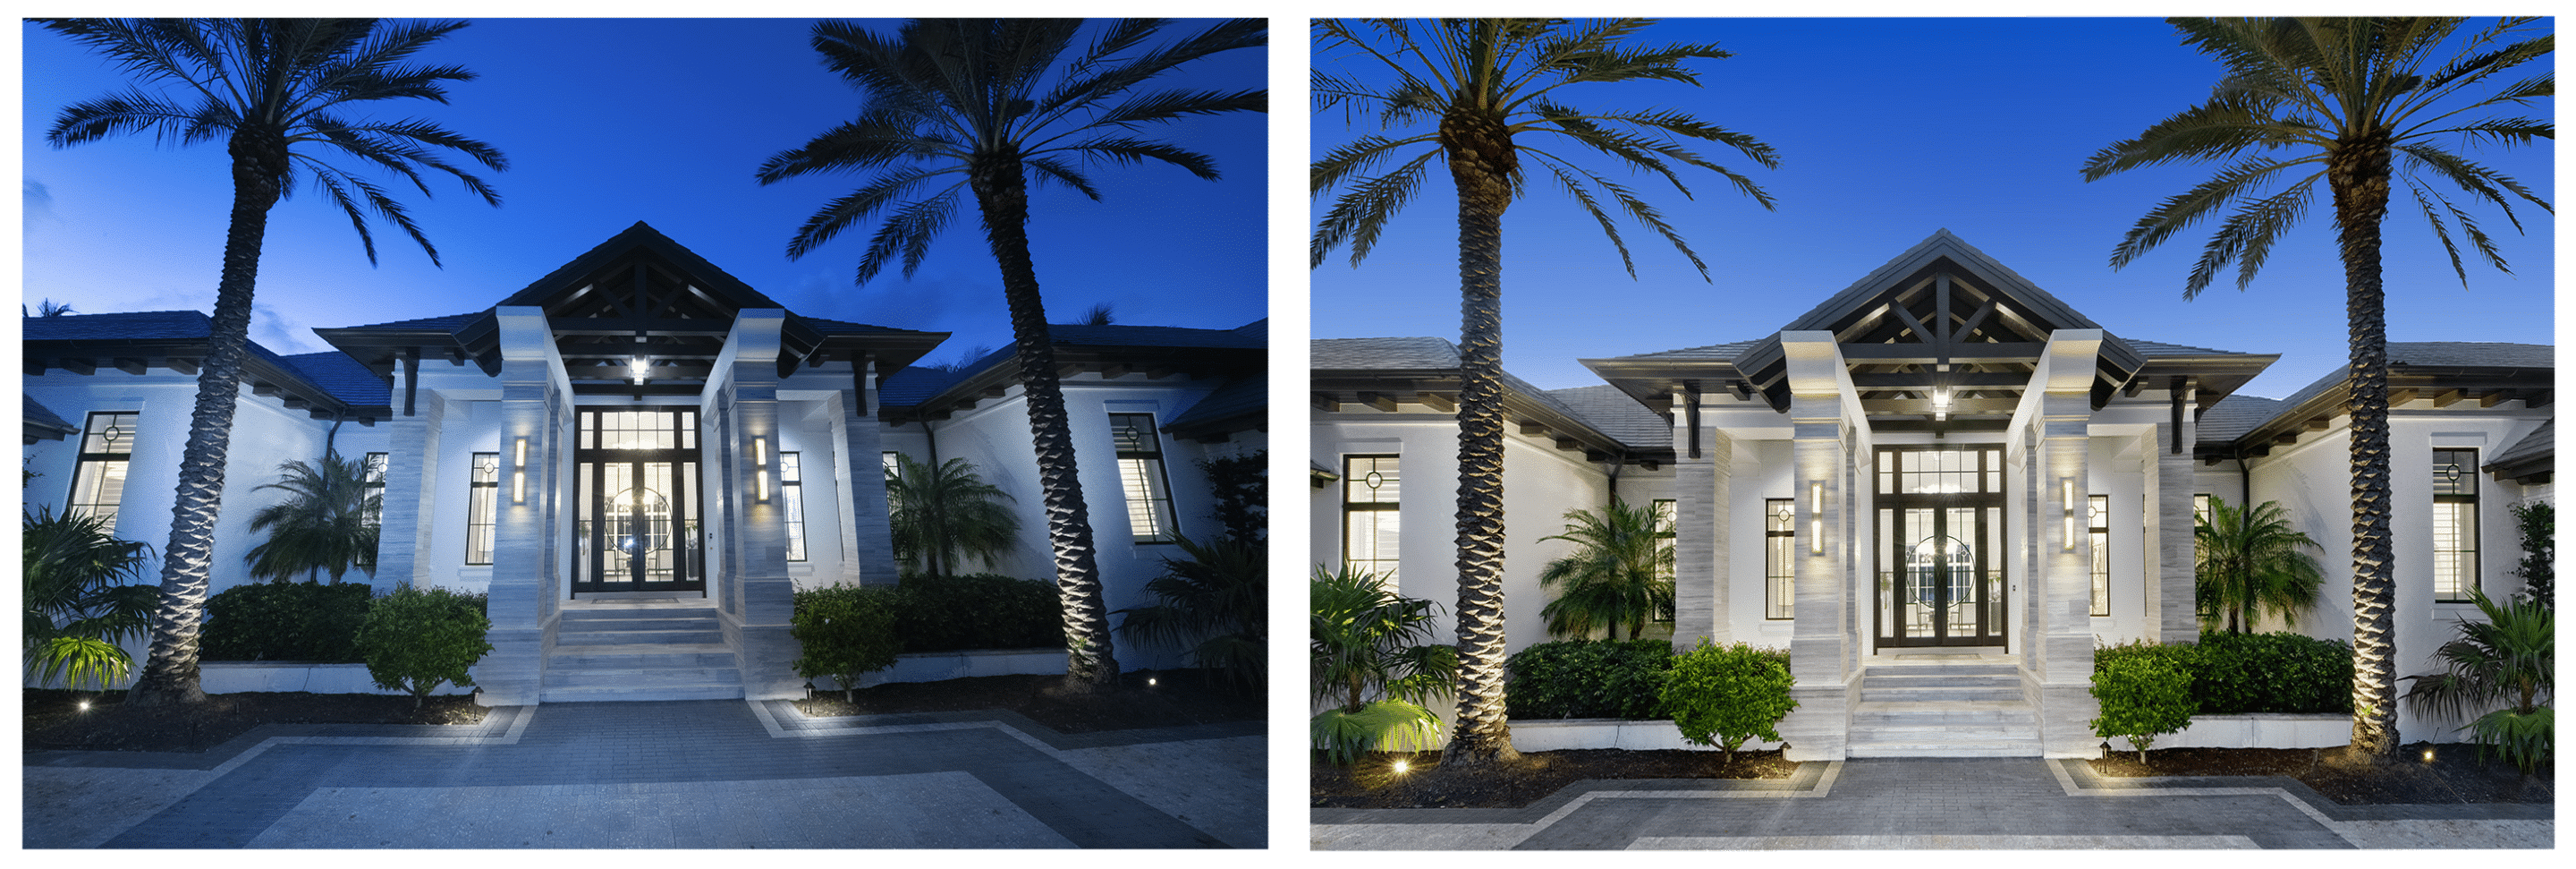 Before And After of House Using Photoshop Retouching To Correct Lighting